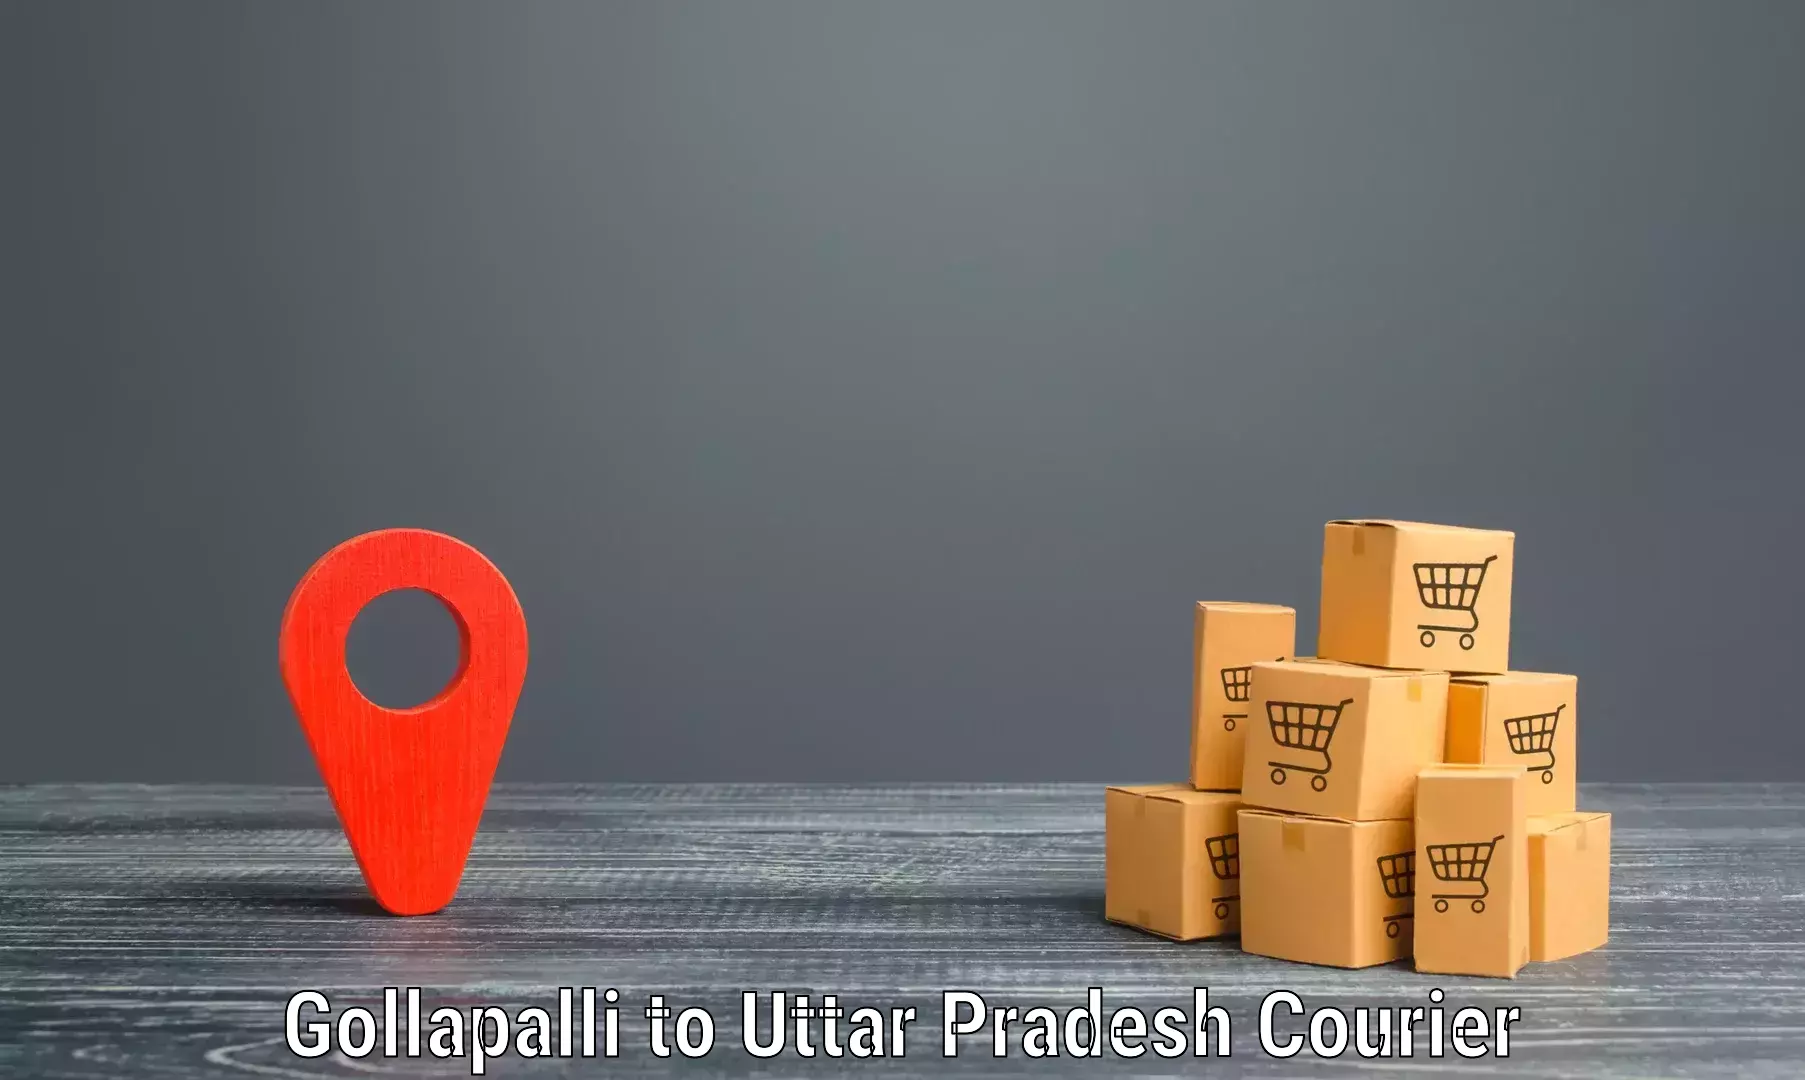 Ocean freight courier Gollapalli to King Georges Medical University Lucknow